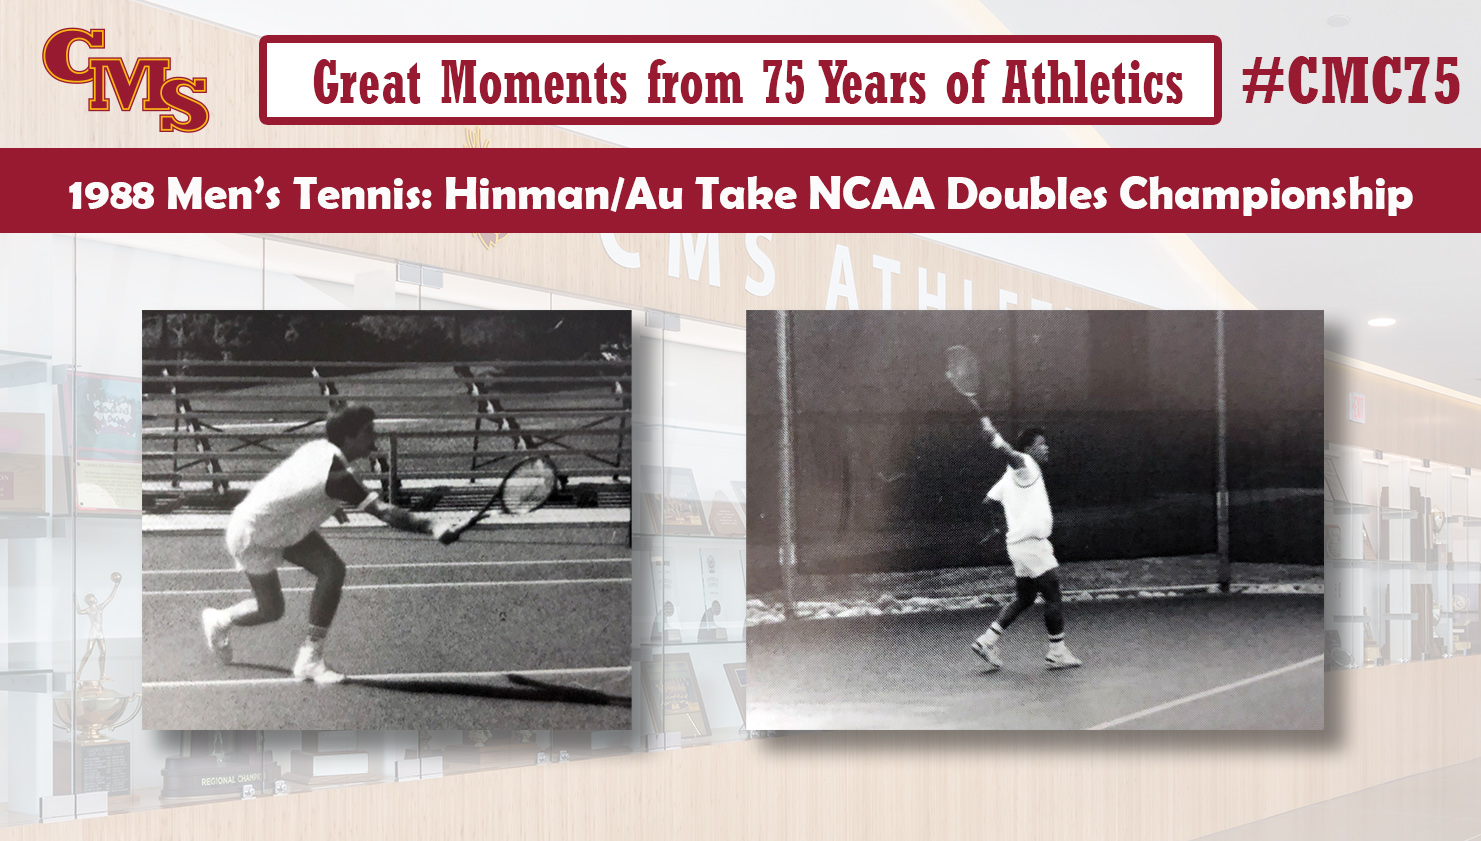 Action photos of Frank Hinman and Lance Au. Words over the photos read: Great Moment from 75 Years of Athletics: 1988 Men's Tennis: Hinman/Au Take NCAA Doubles Championship